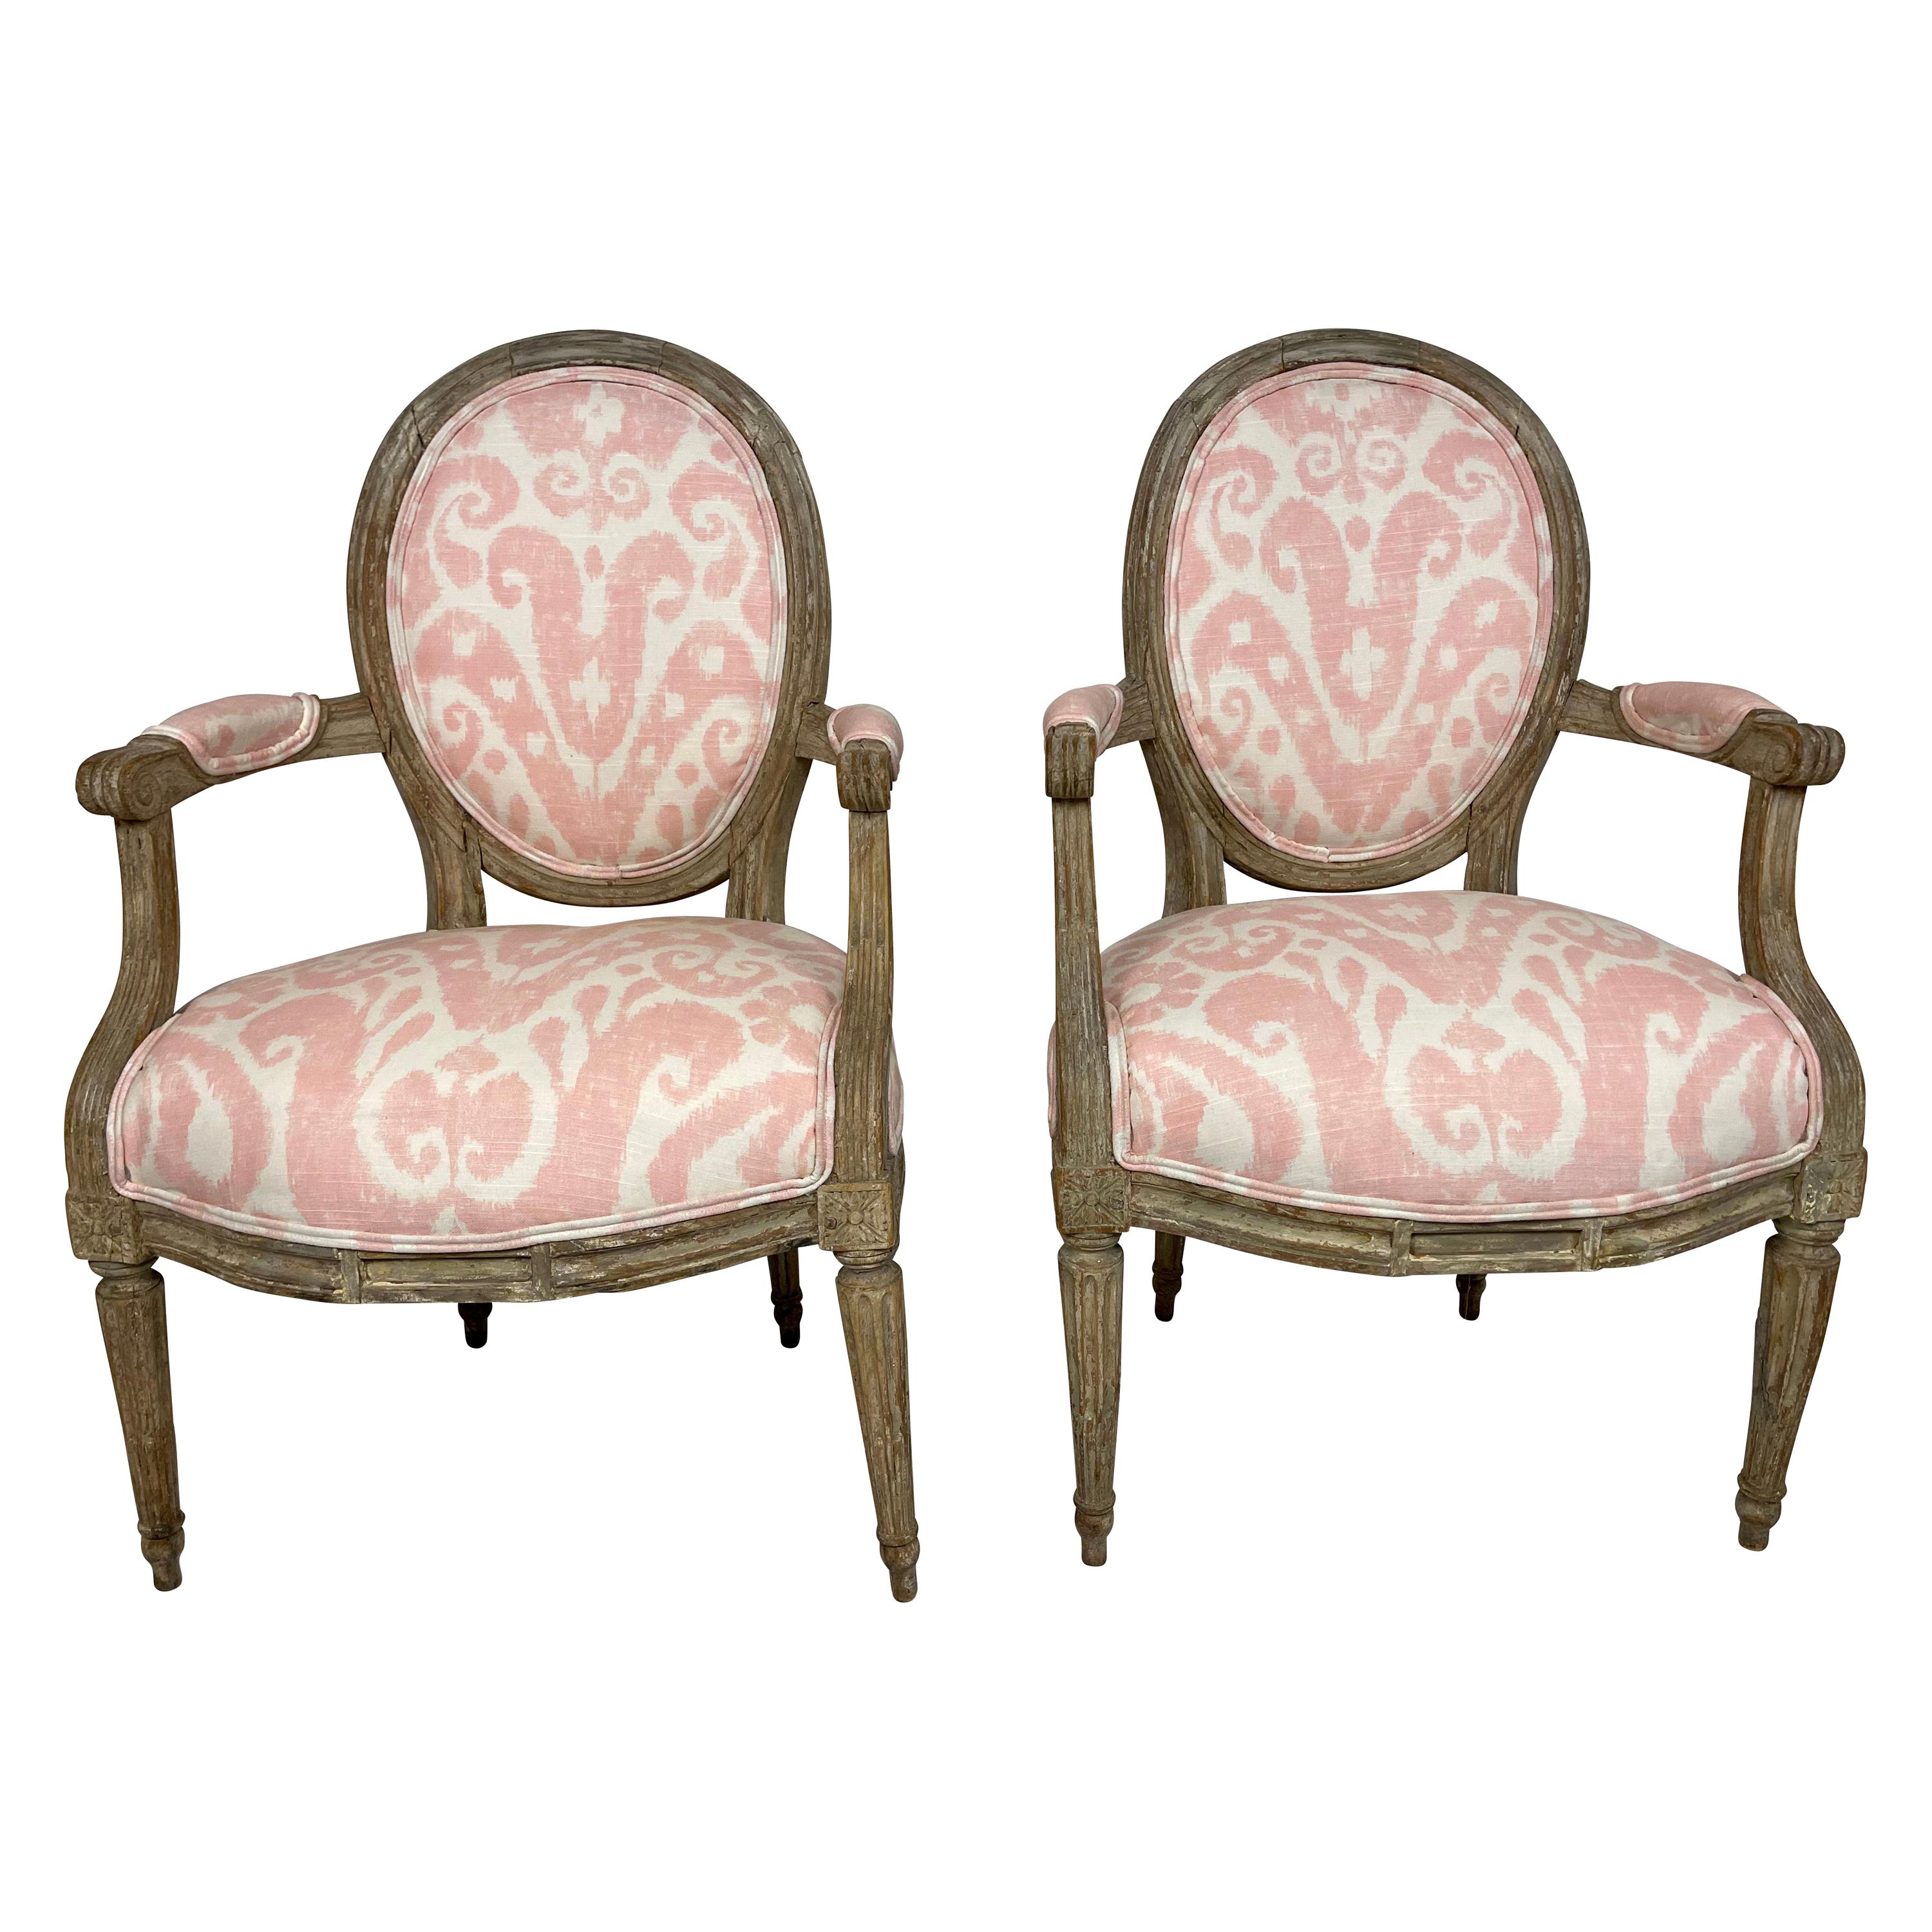 Louis XVI Style Grey Painted Armchairs in Pink and White Ikat Upholstery